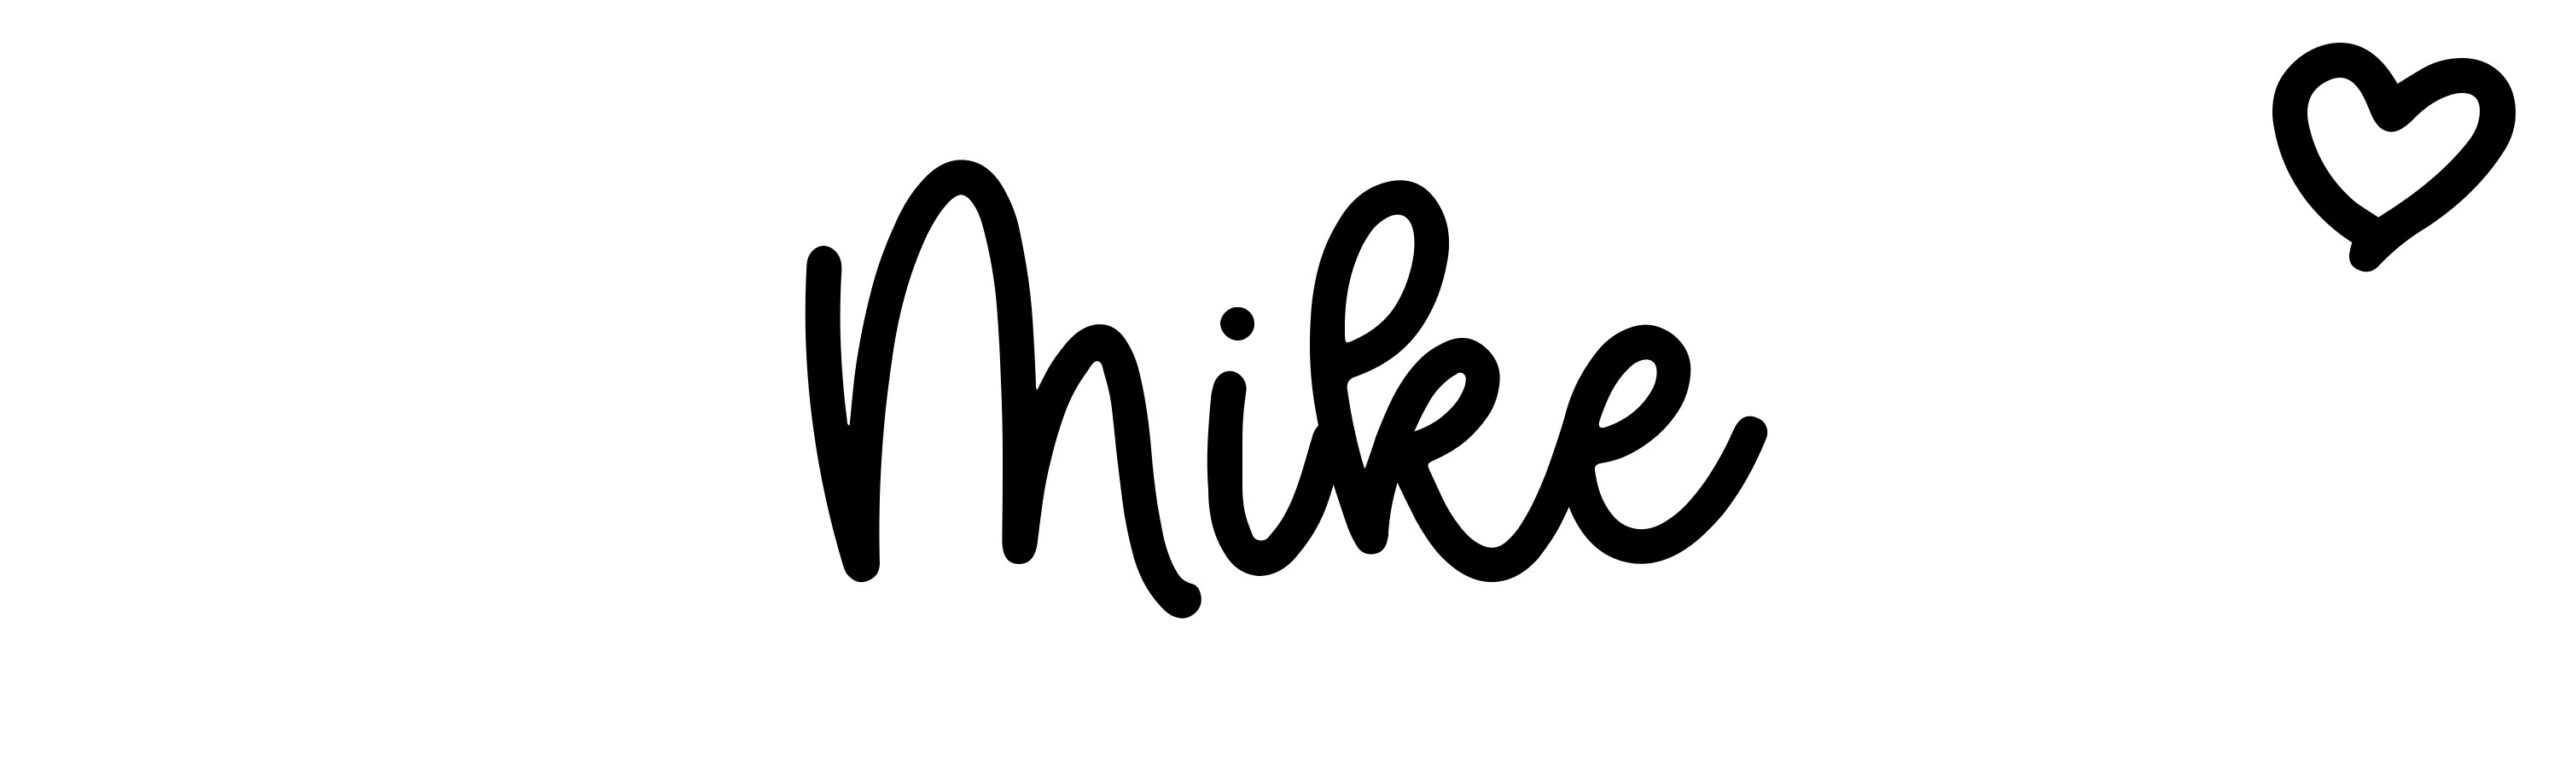 Mike - Name meaning, origin, variations and more